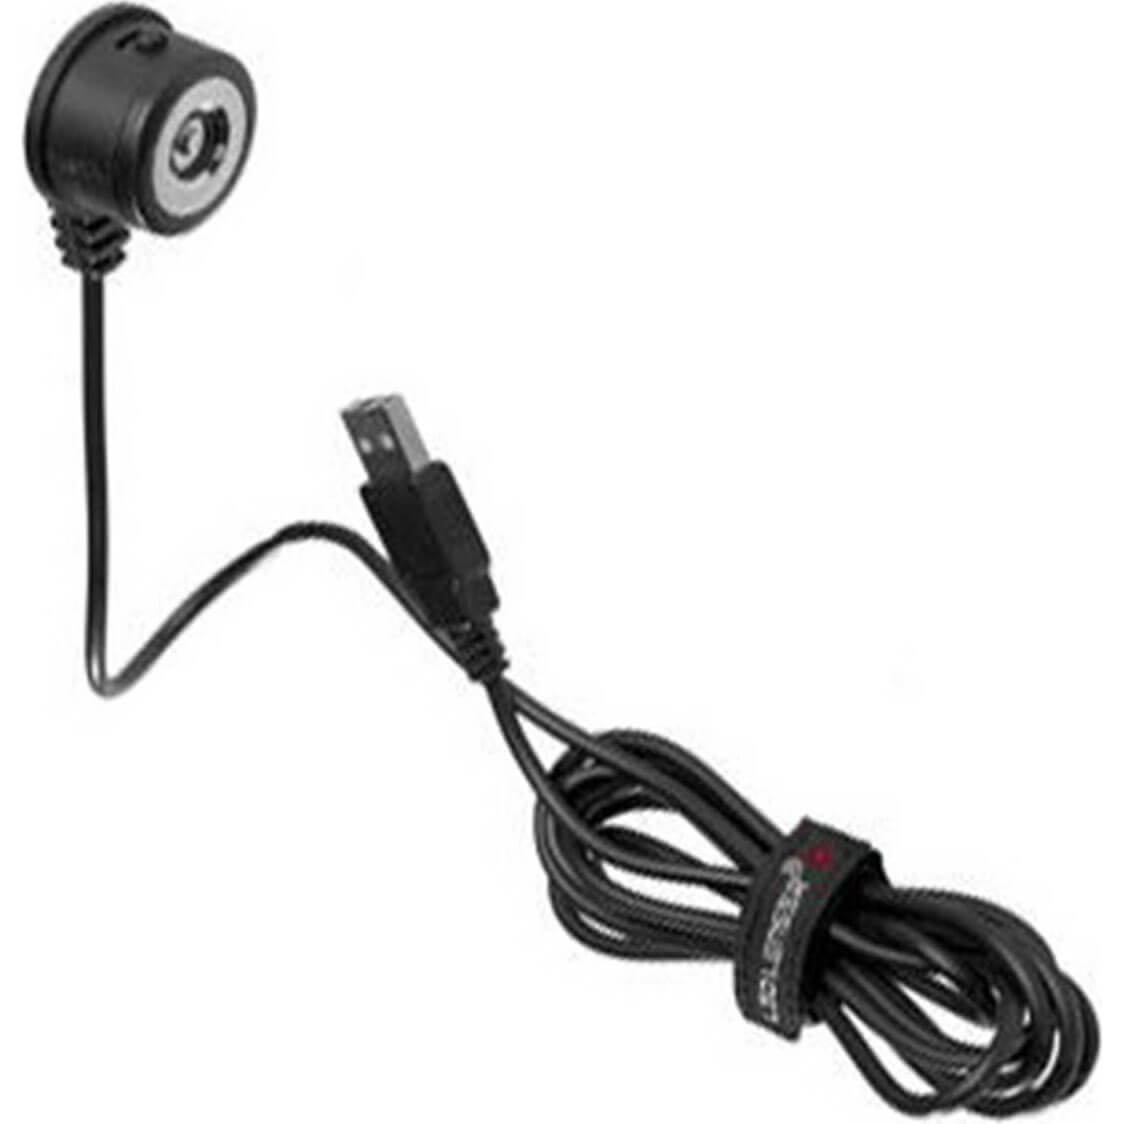 Algemeen beetje Verplicht LED Lenser Floating Charger for M7R and P7R Torches | Torch Chargers